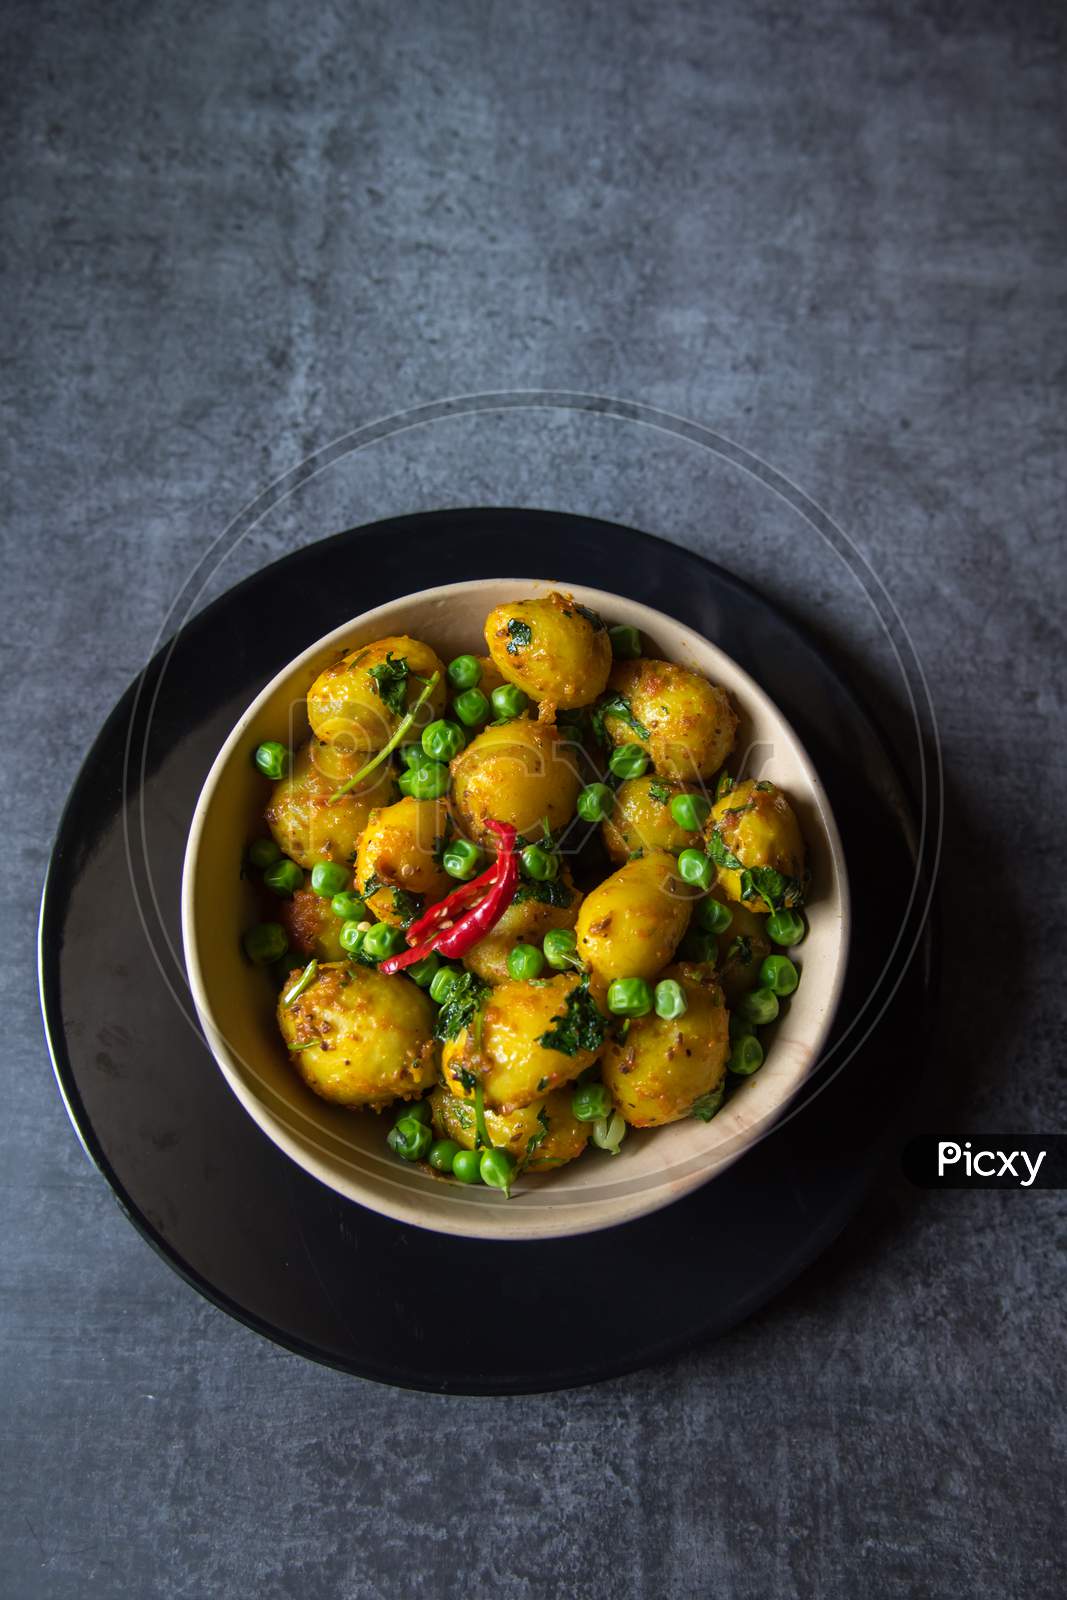 Indian dum aloo or potatoes cooked in slow fire in a bowl.